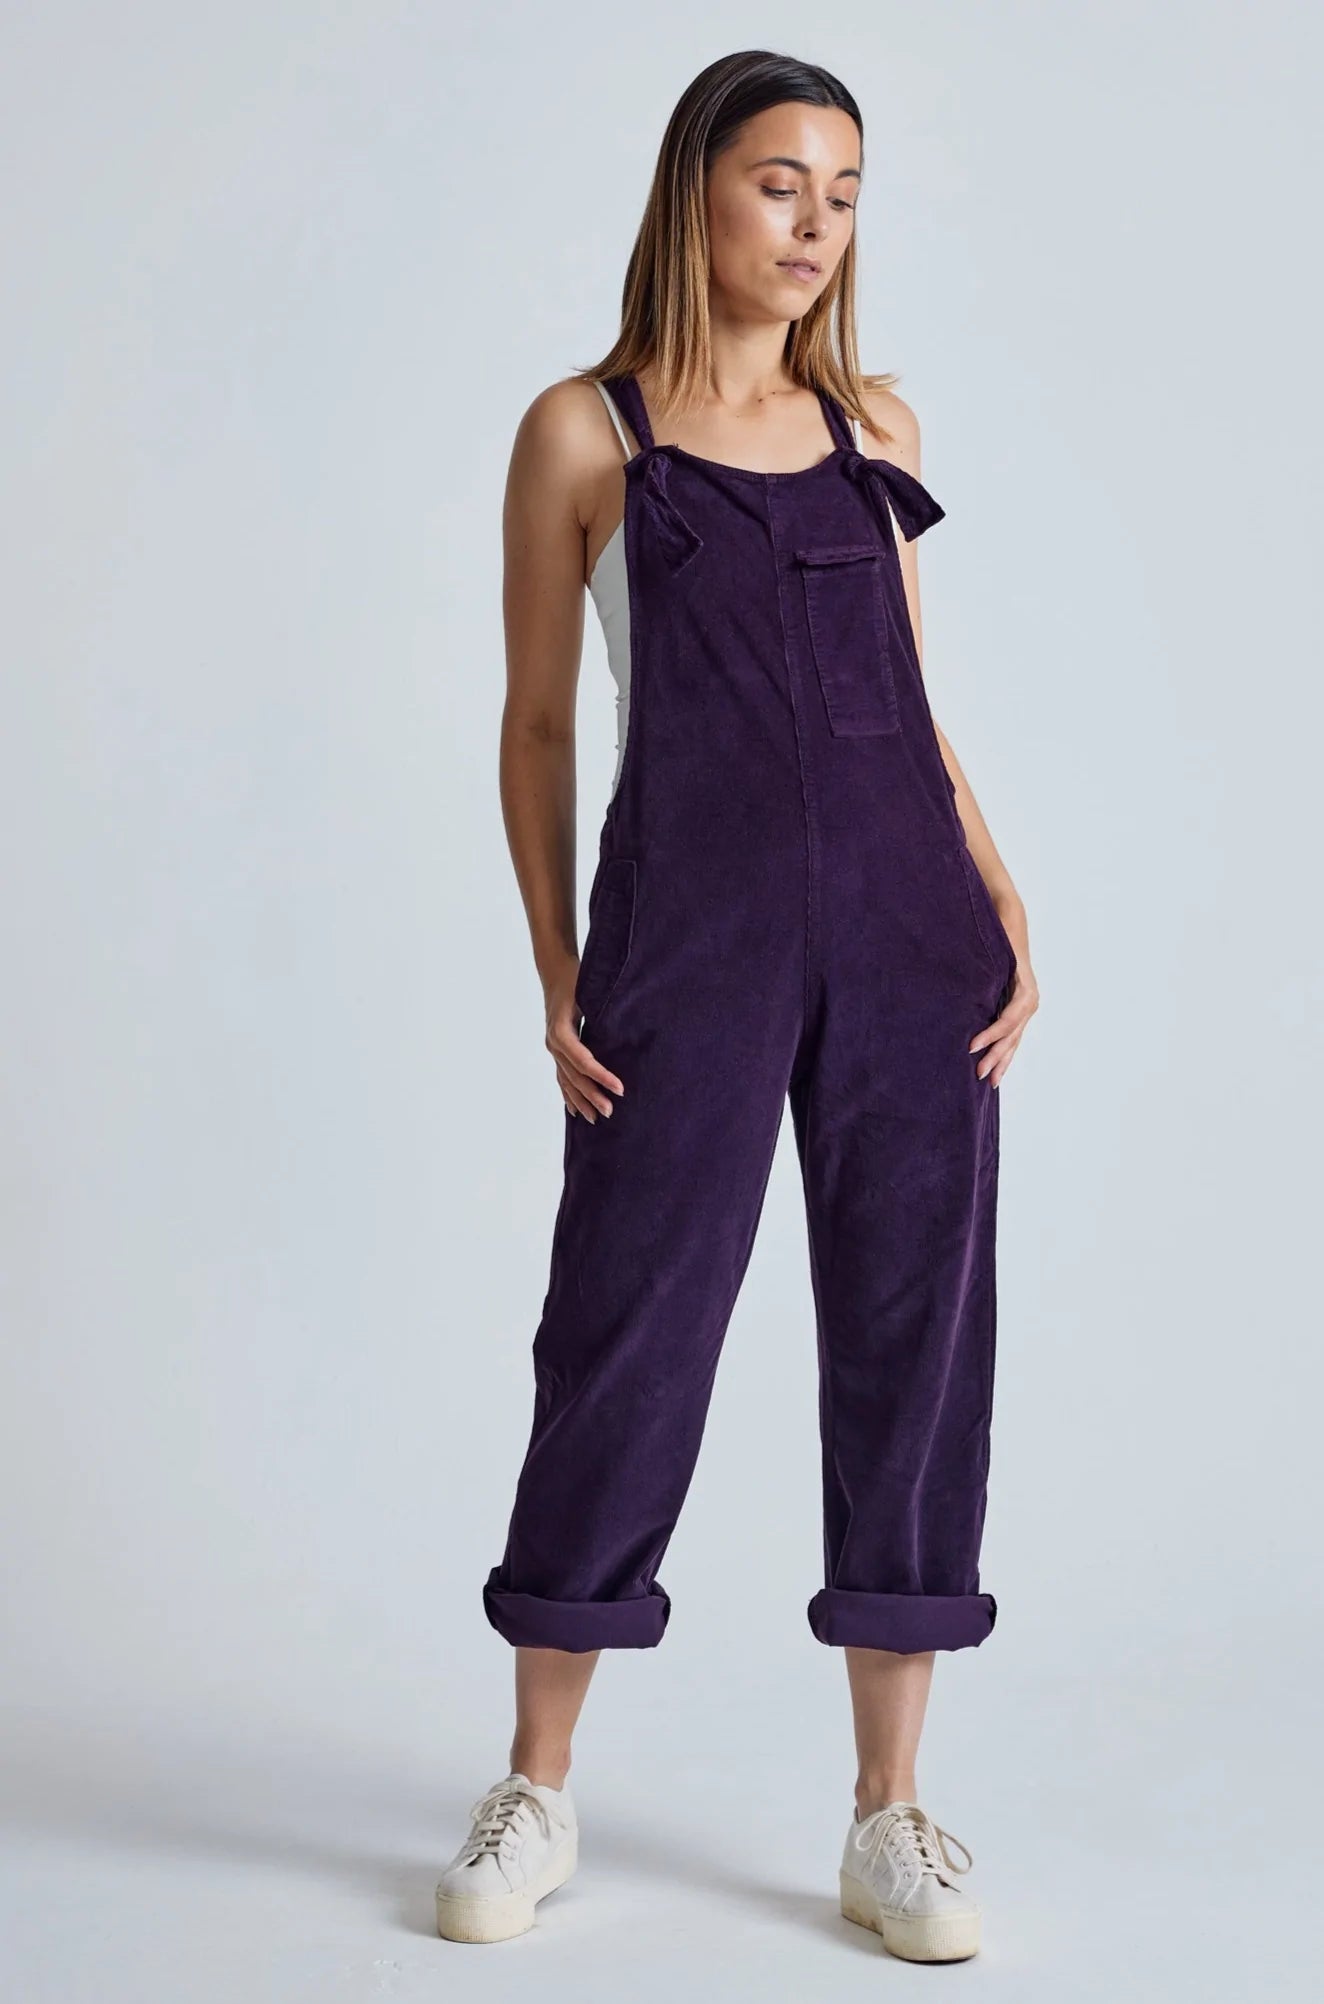 MARY-LOU Aubergine - GOTS Organic Cotton Cord Dungarees by Flax & Loom, SIZE 2 / UK 10 / EUR 38